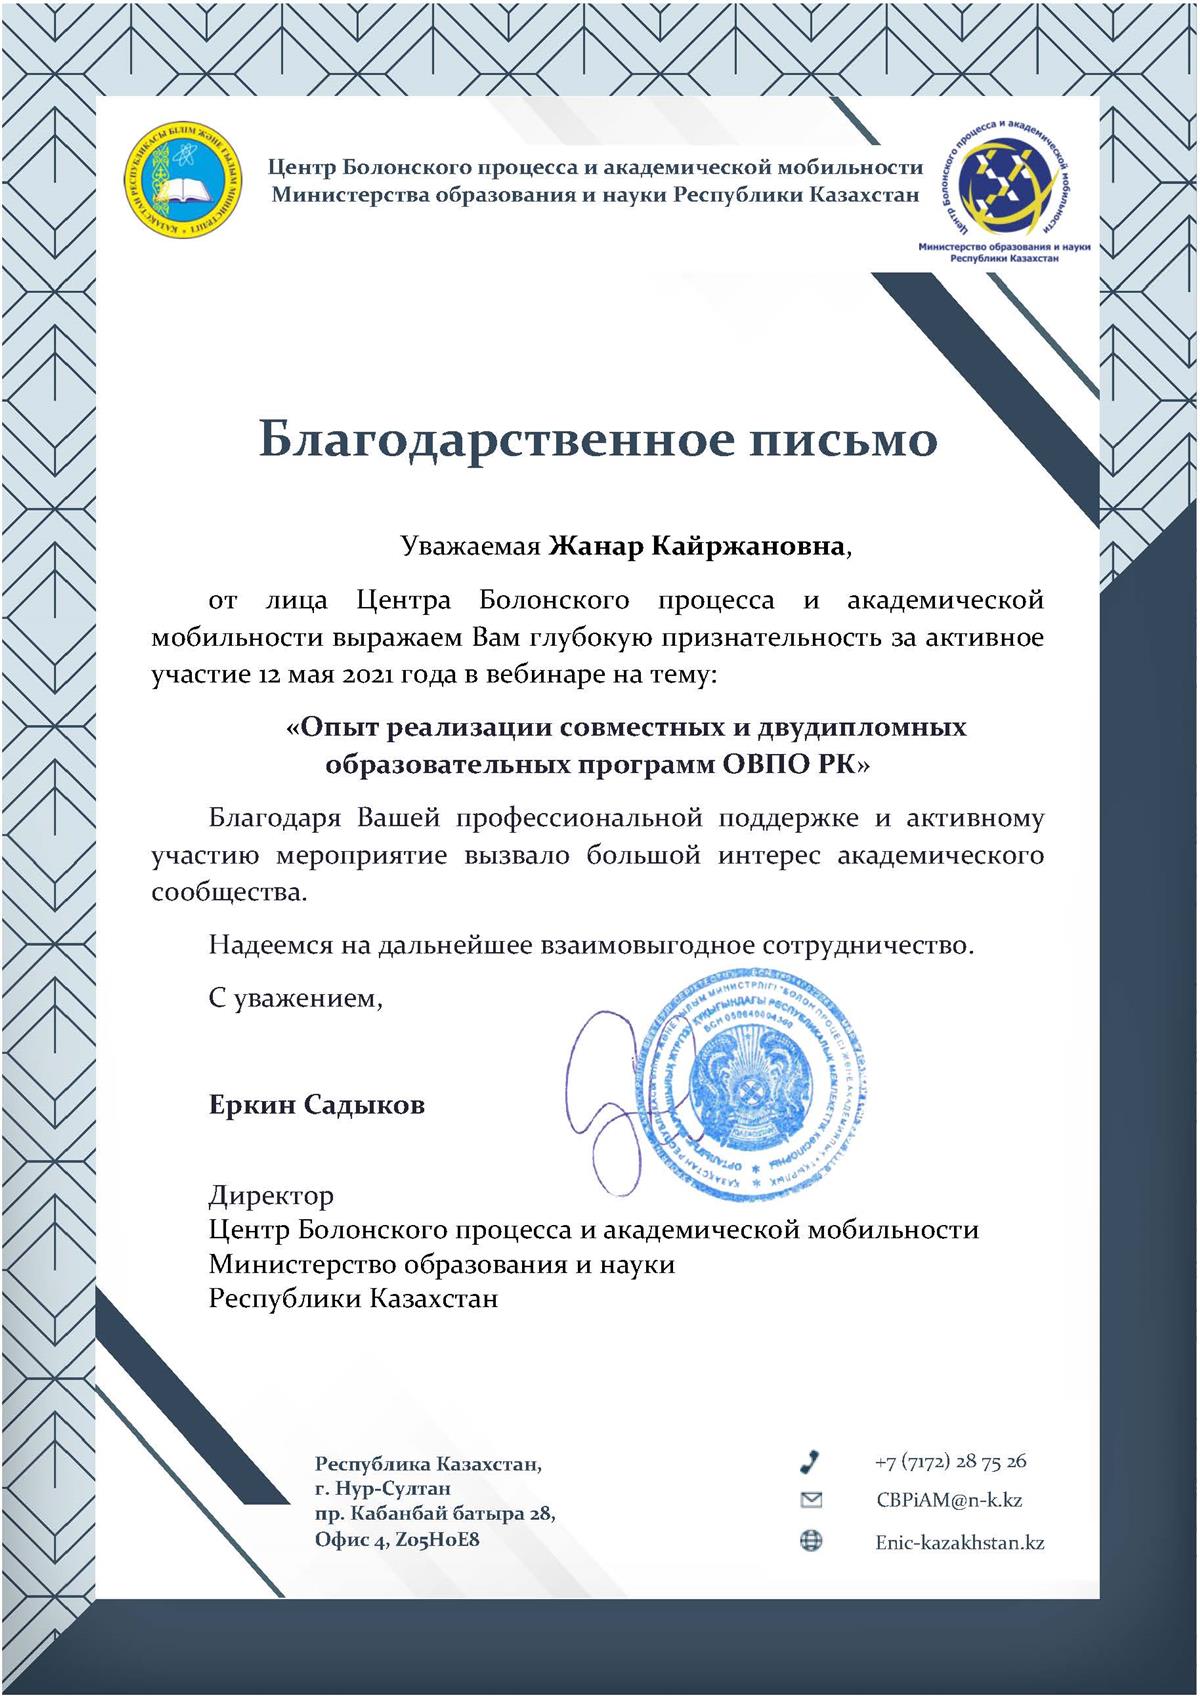 Webinar on the topic "Experience in the implementation of joint and double-degree educational programs of organizations of higher and postgraduate education in the Republic of Kazakhstan."